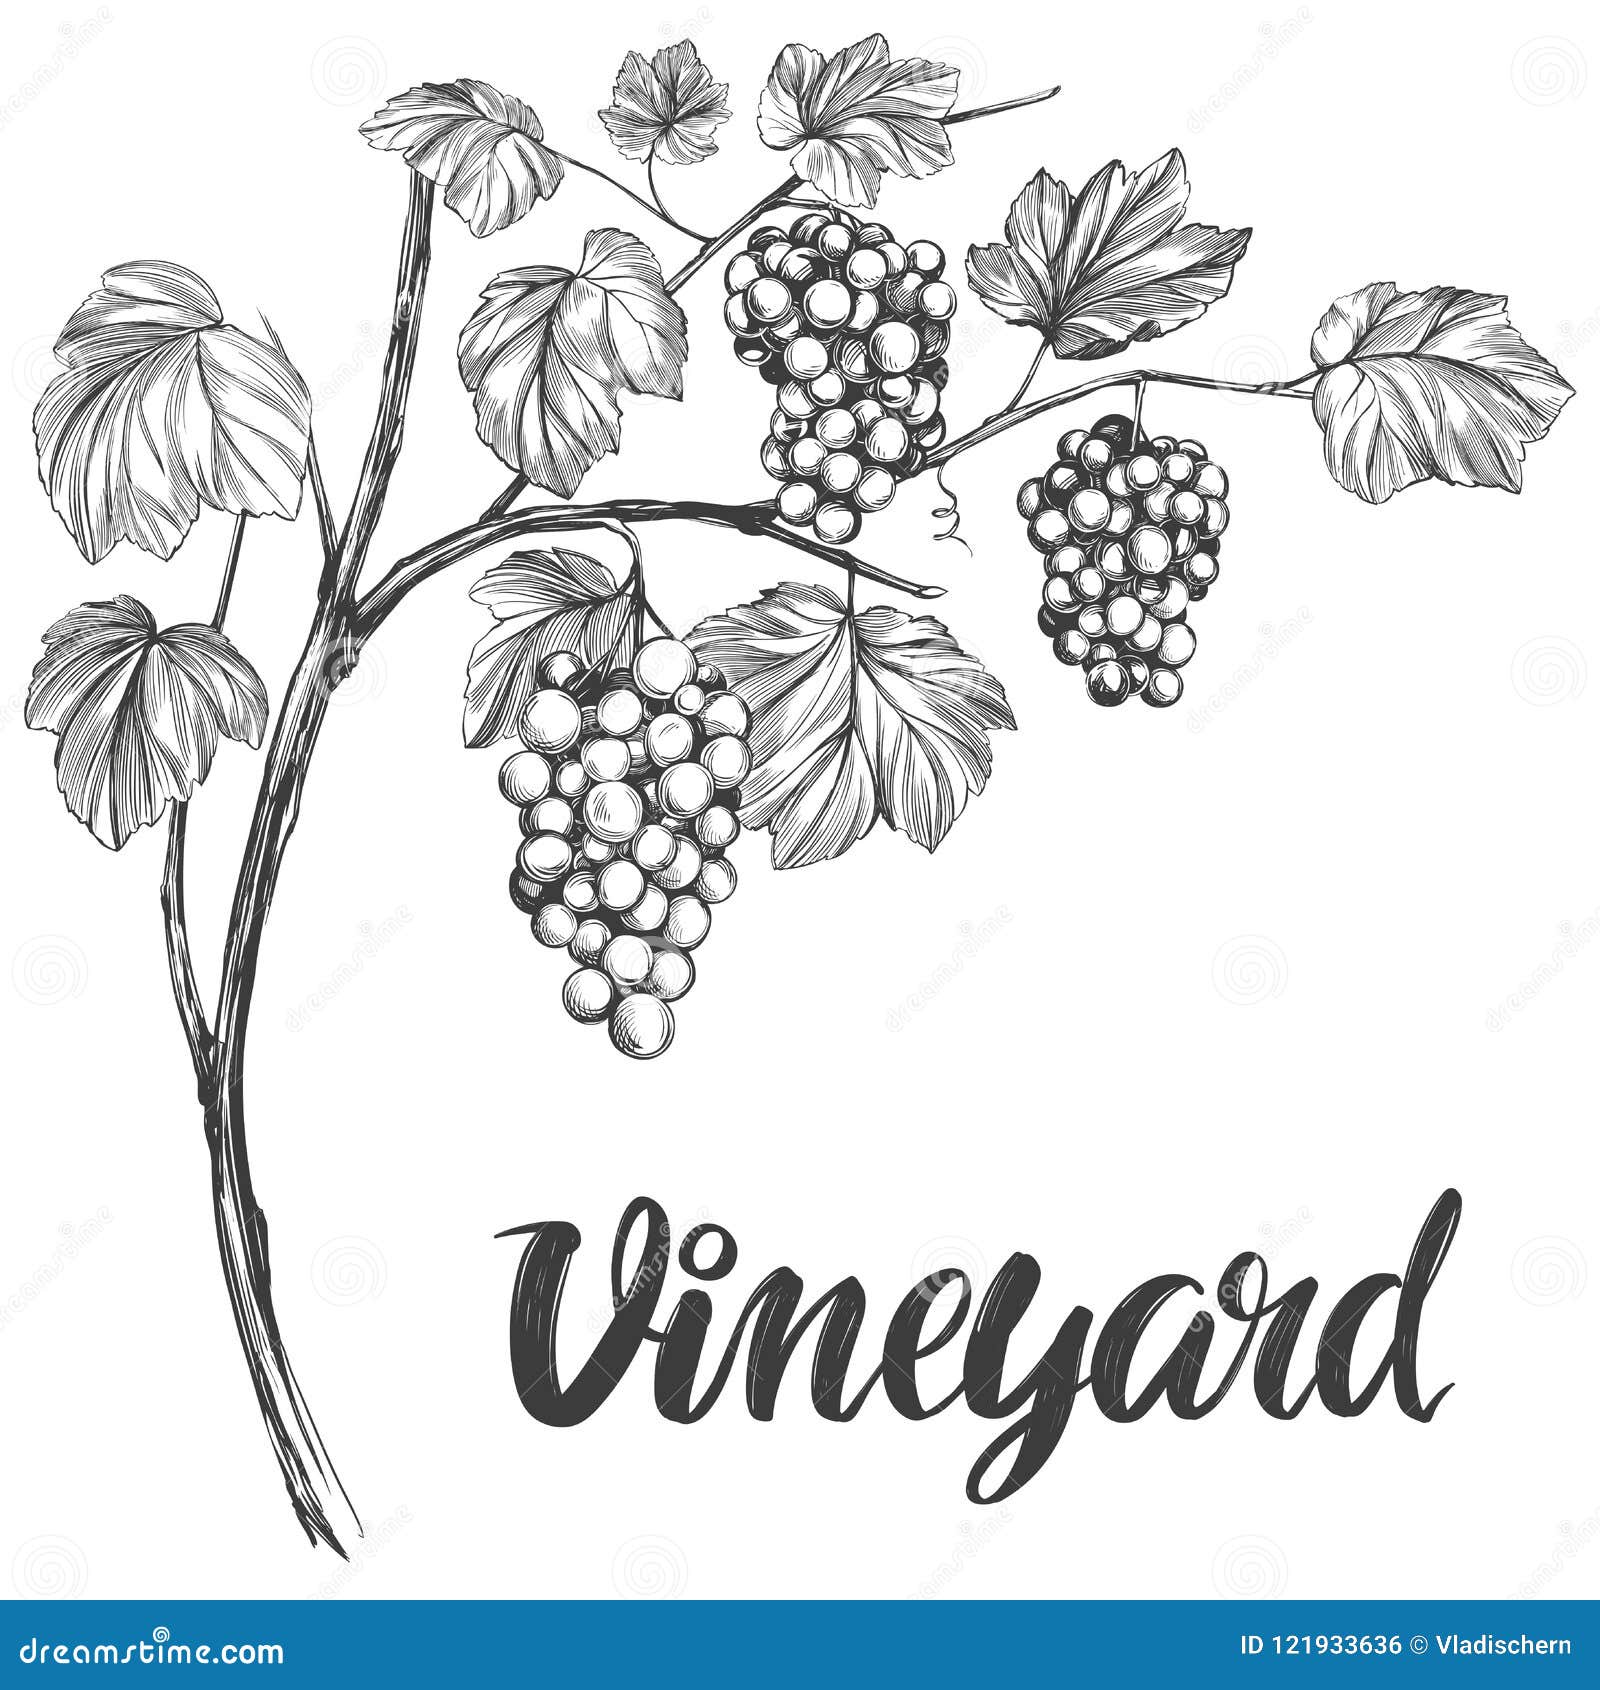 Hand Drawn Vector Illustration of Branch Grapes Vine Sketch Isolated on  White Background Stock Vector  Illustration of drink branch 99820522